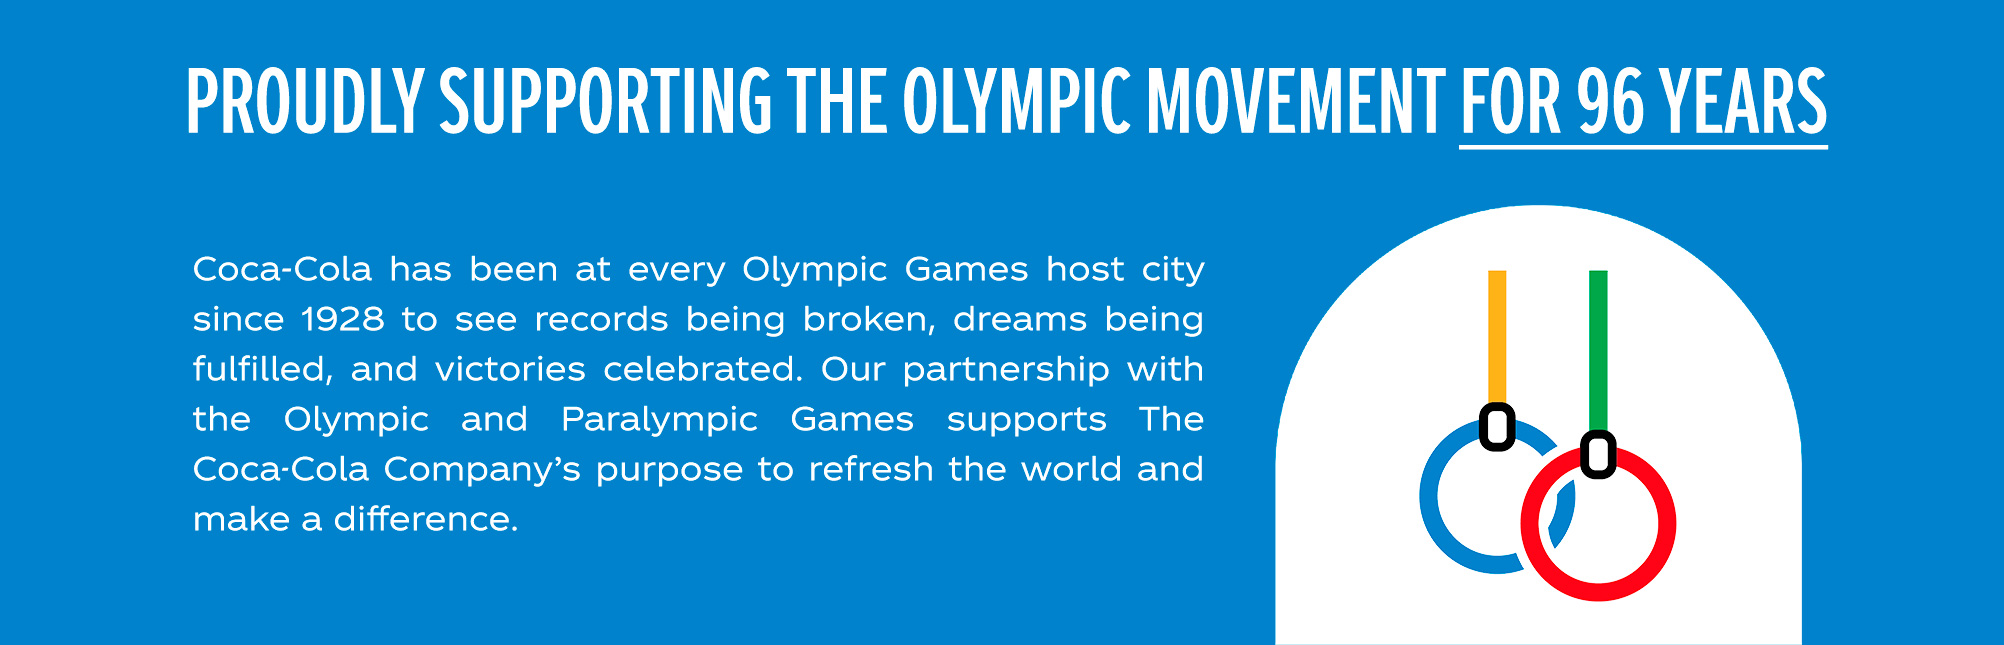 Proudly supporting the Olympic movement for 96 years